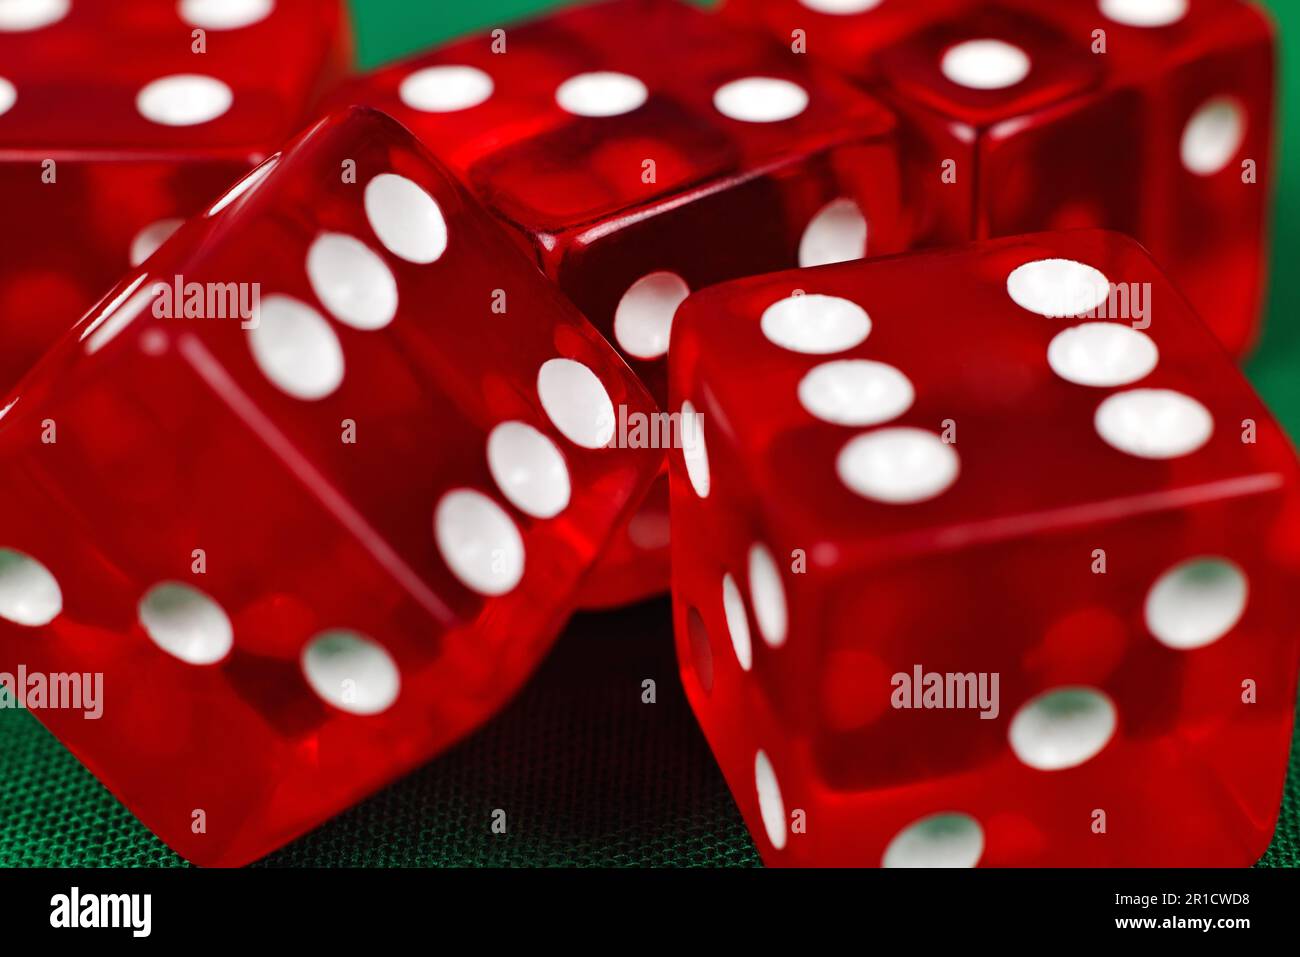 red dice on green table, extra close up Stock Photo